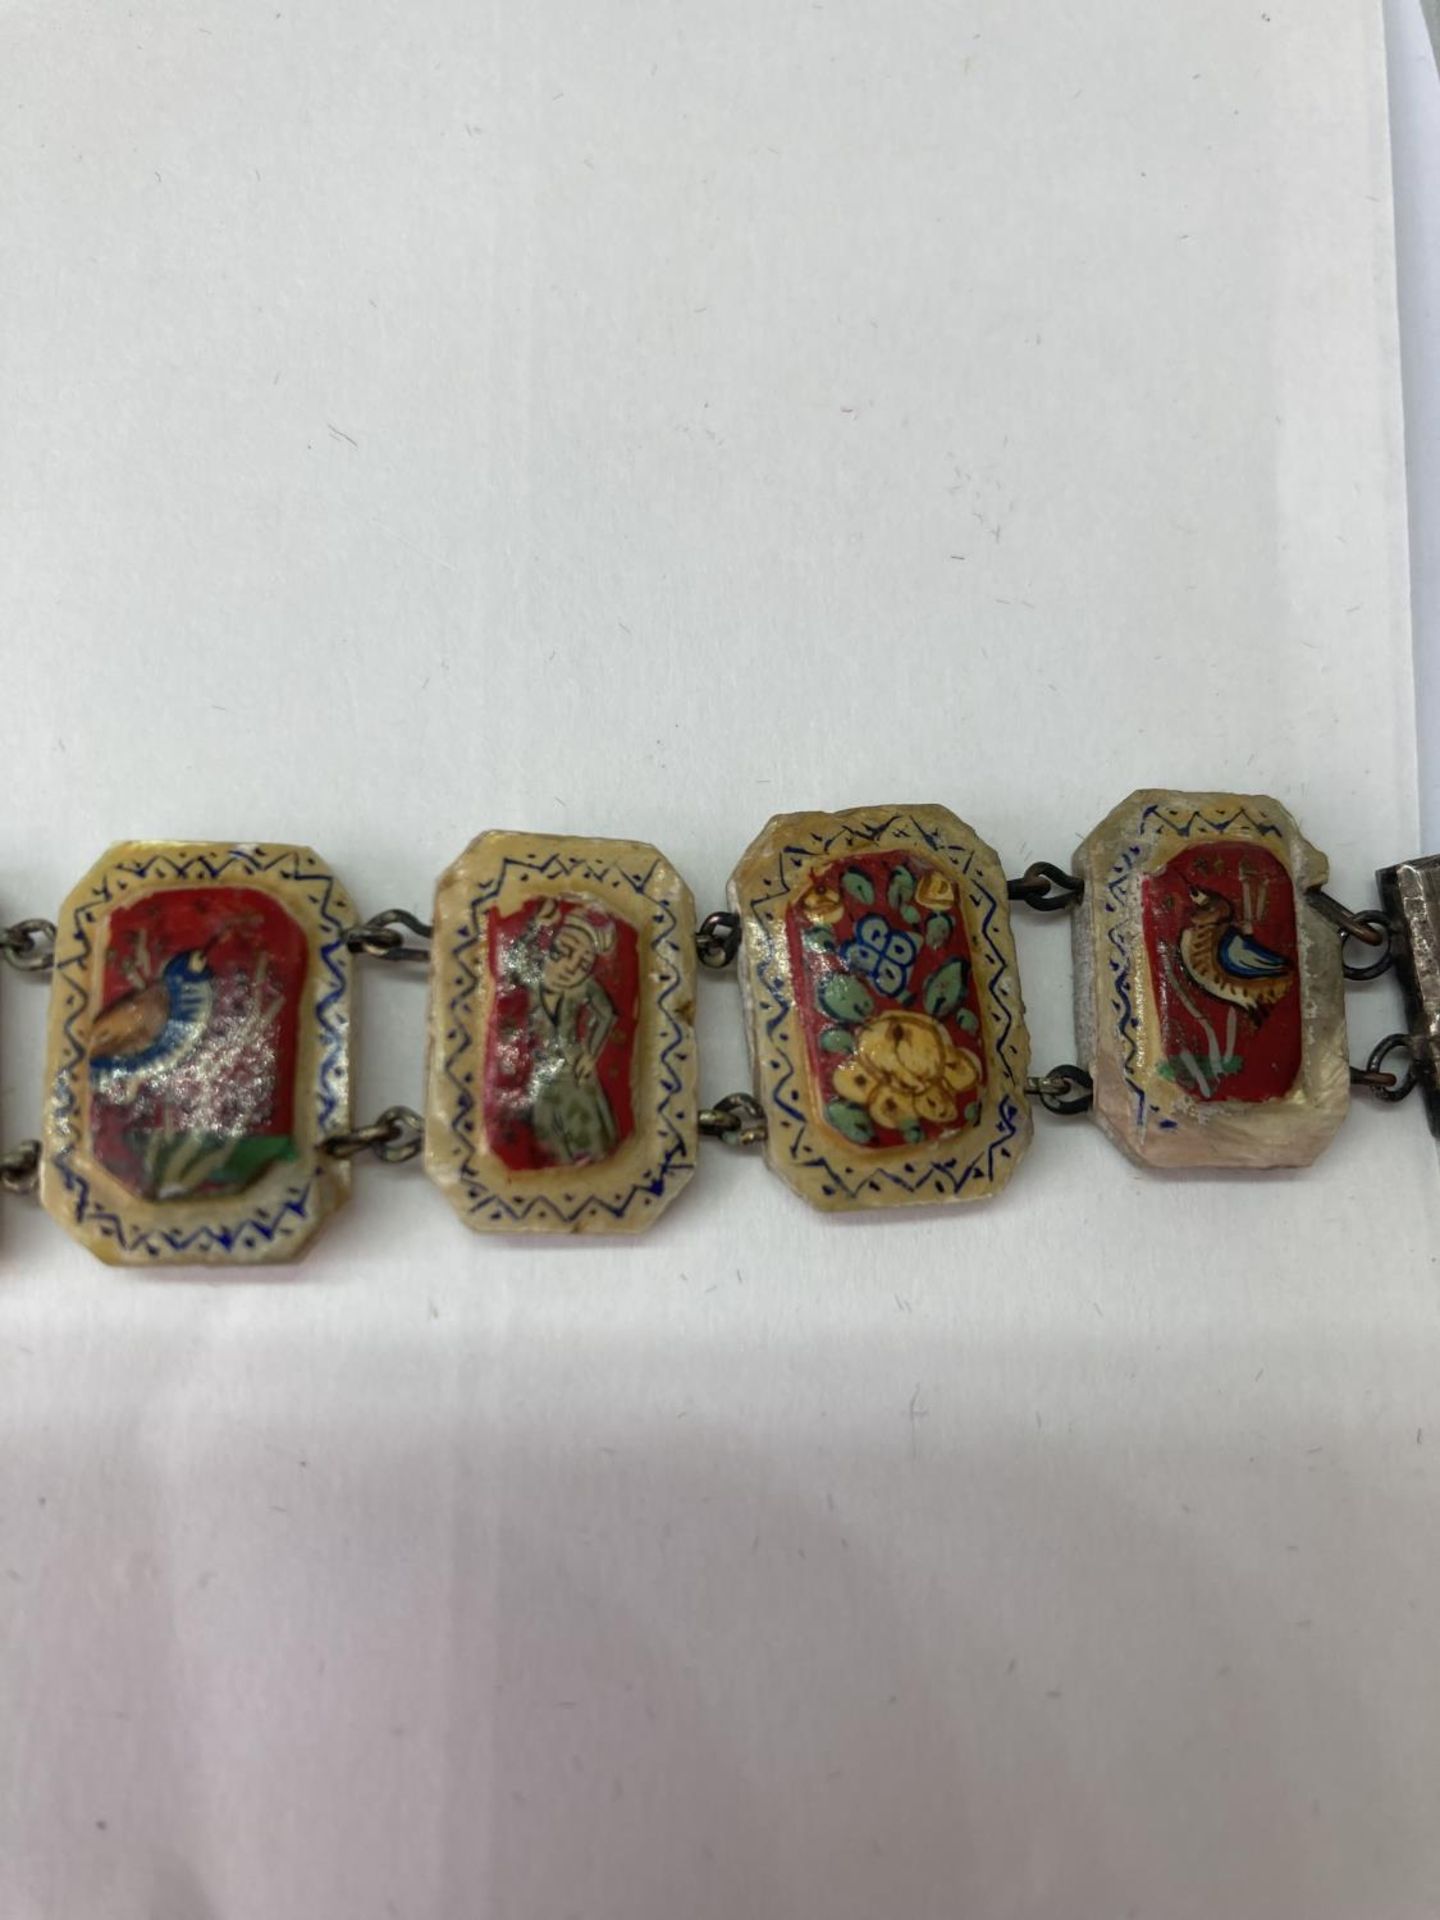 A DECORATIVE HAND PAINTED PERSIAN MOTHER OF PEARL BRACELET IN A PRESENTATION BOX - Image 10 of 12